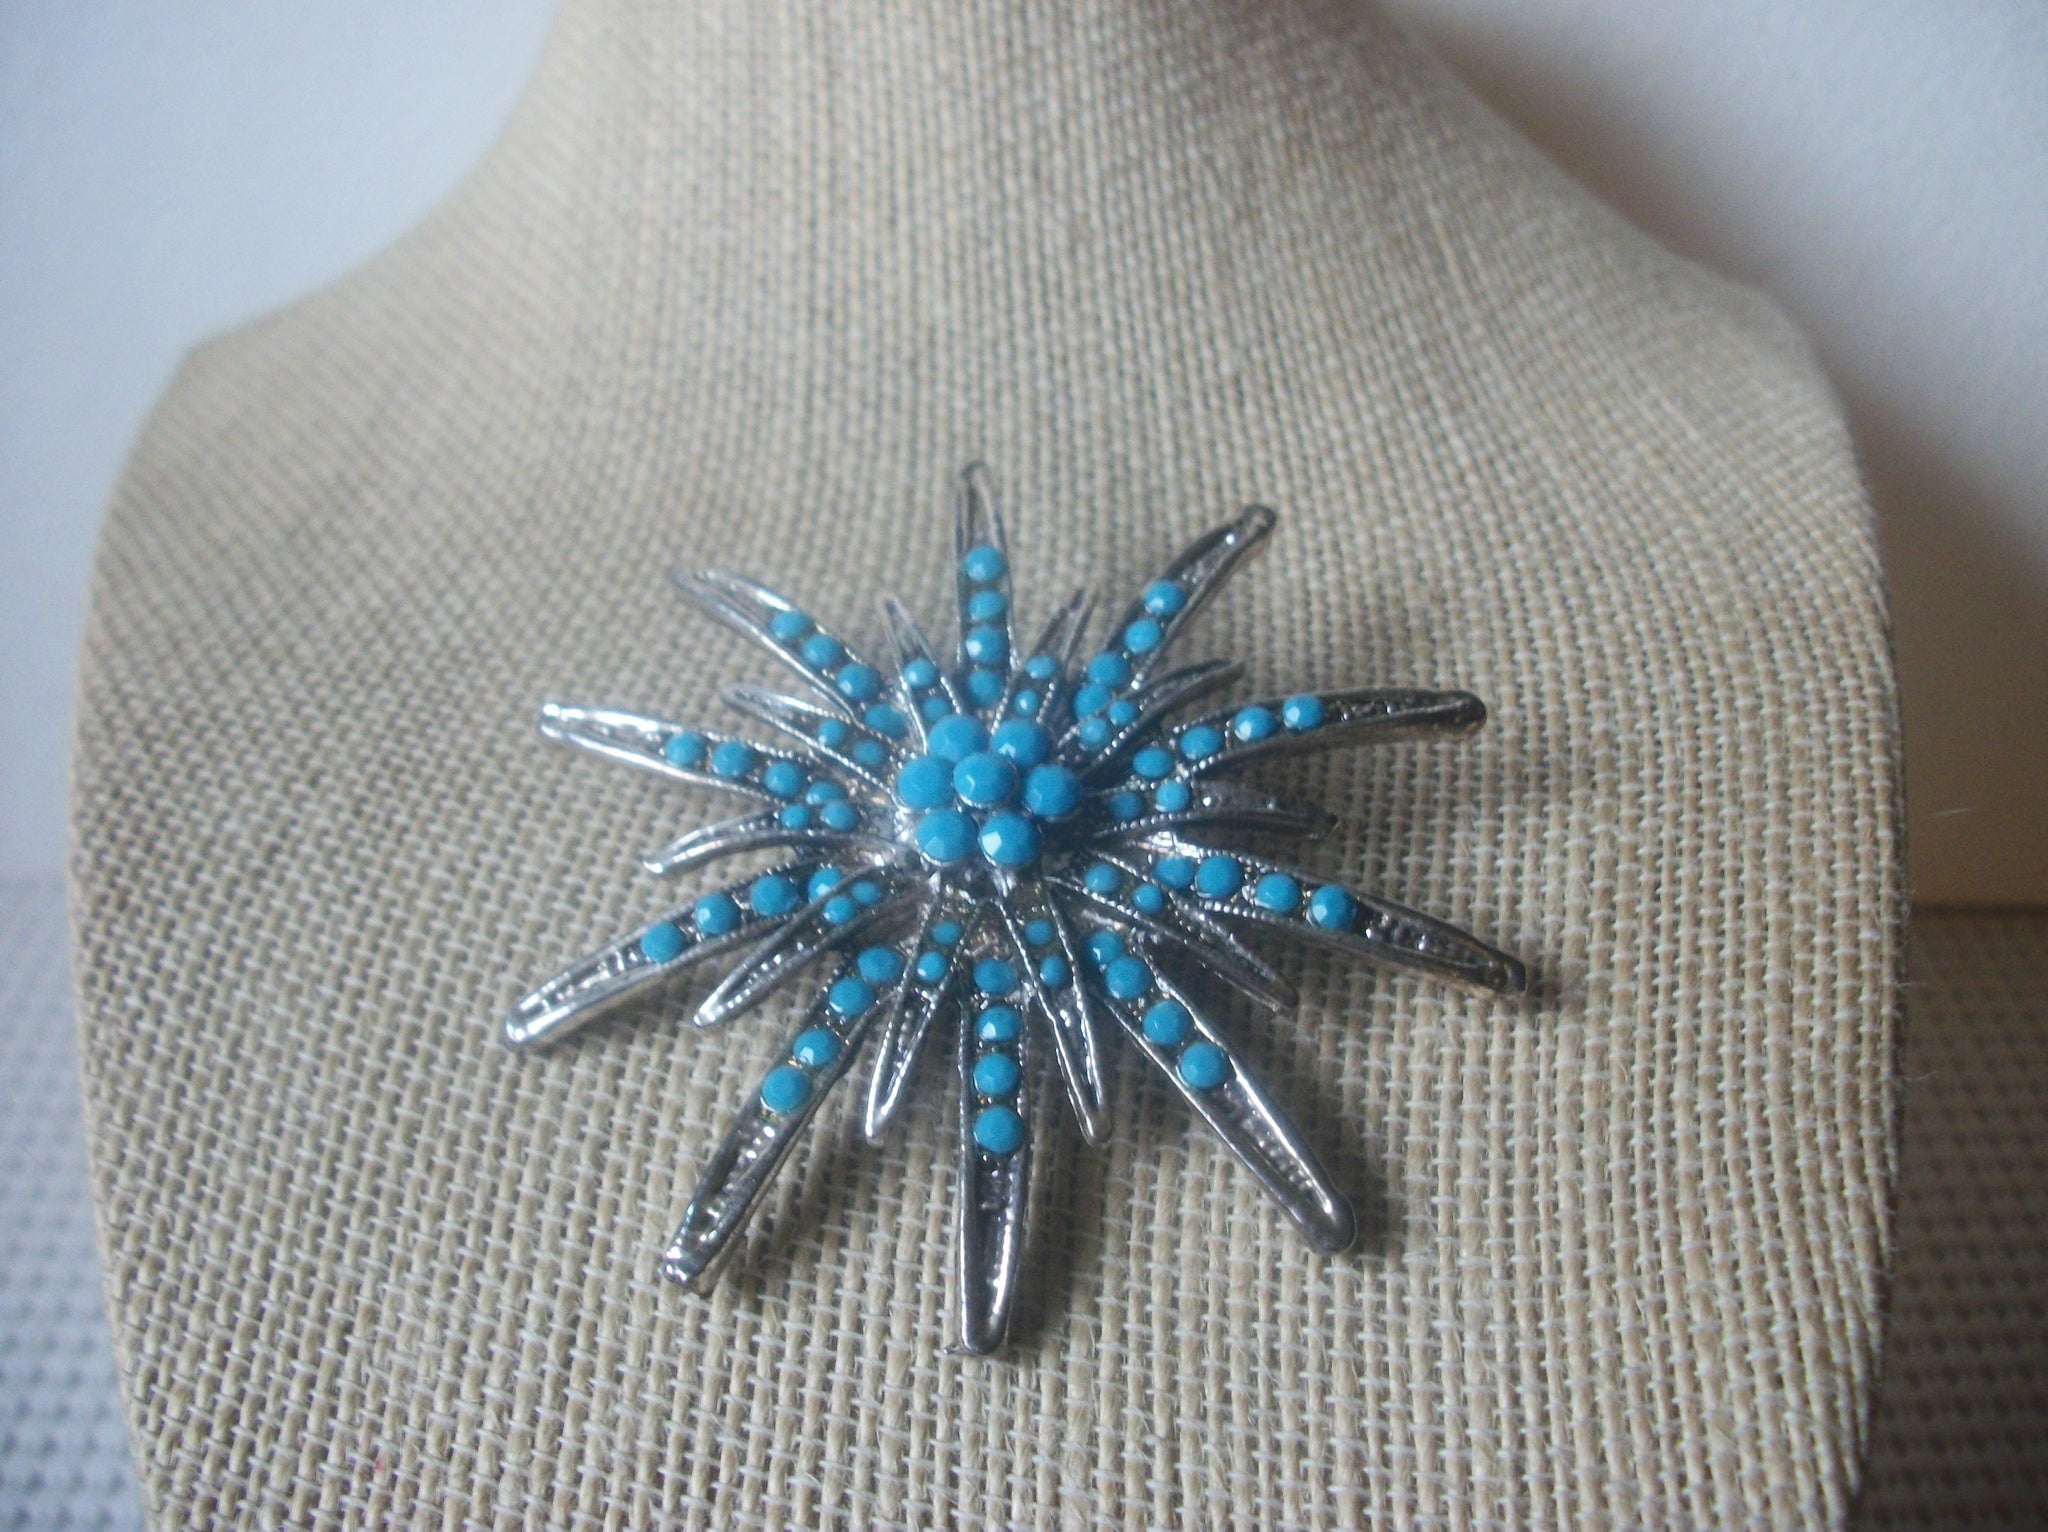 Larger Southwestern Star Silver Tone Blue Micro Beads Vintage Brooch Pin 022221